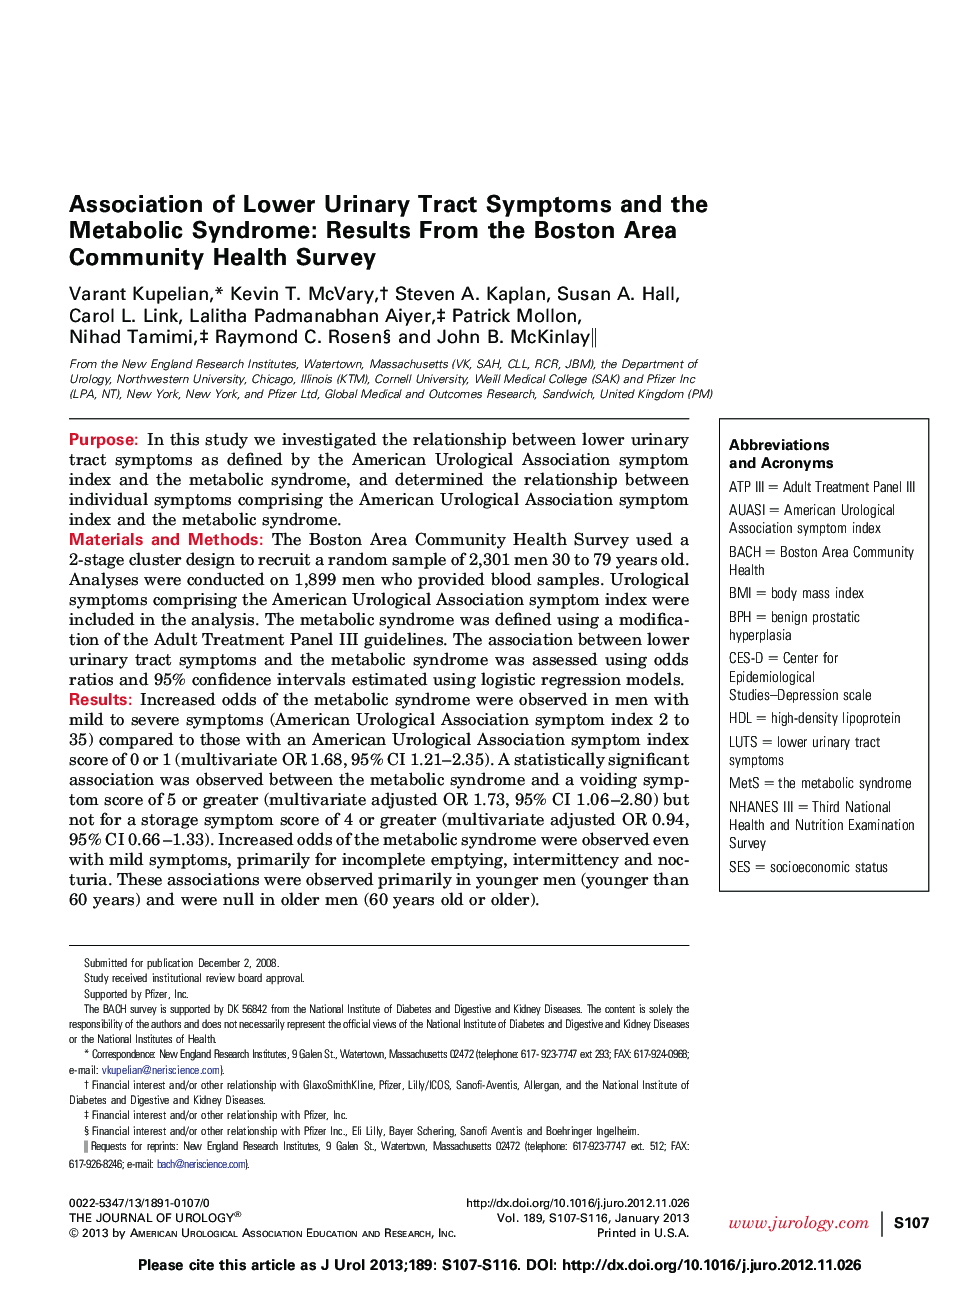 Association of Lower Urinary Tract Symptoms and the Metabolic Syndrome: Results From the Boston Area Community Health Survey 